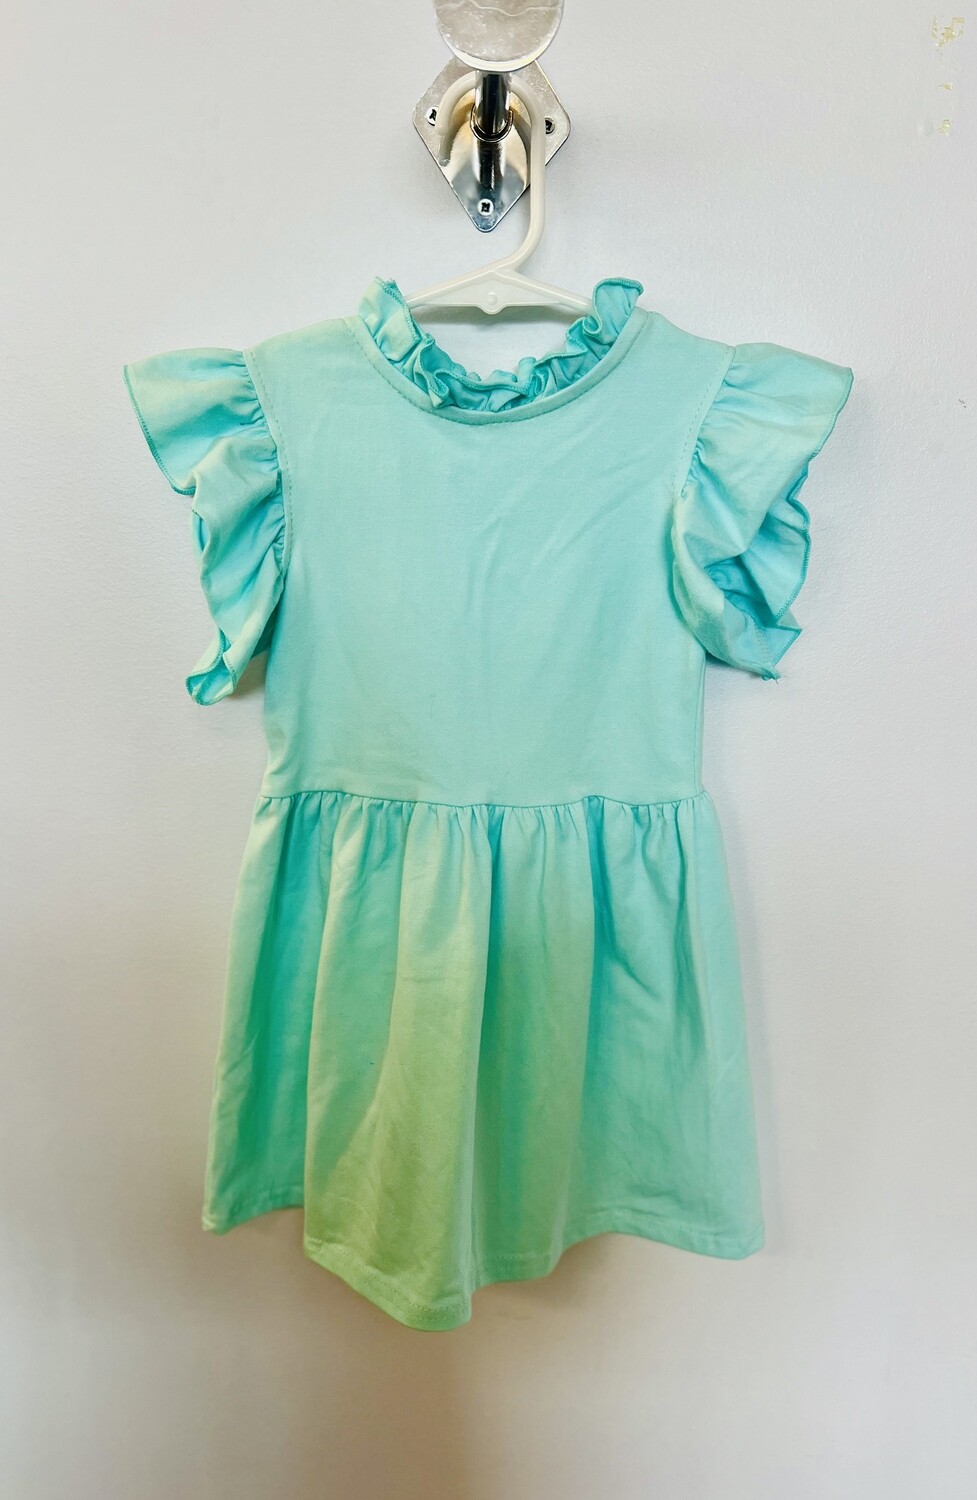 Childrens Dress with Ruffle